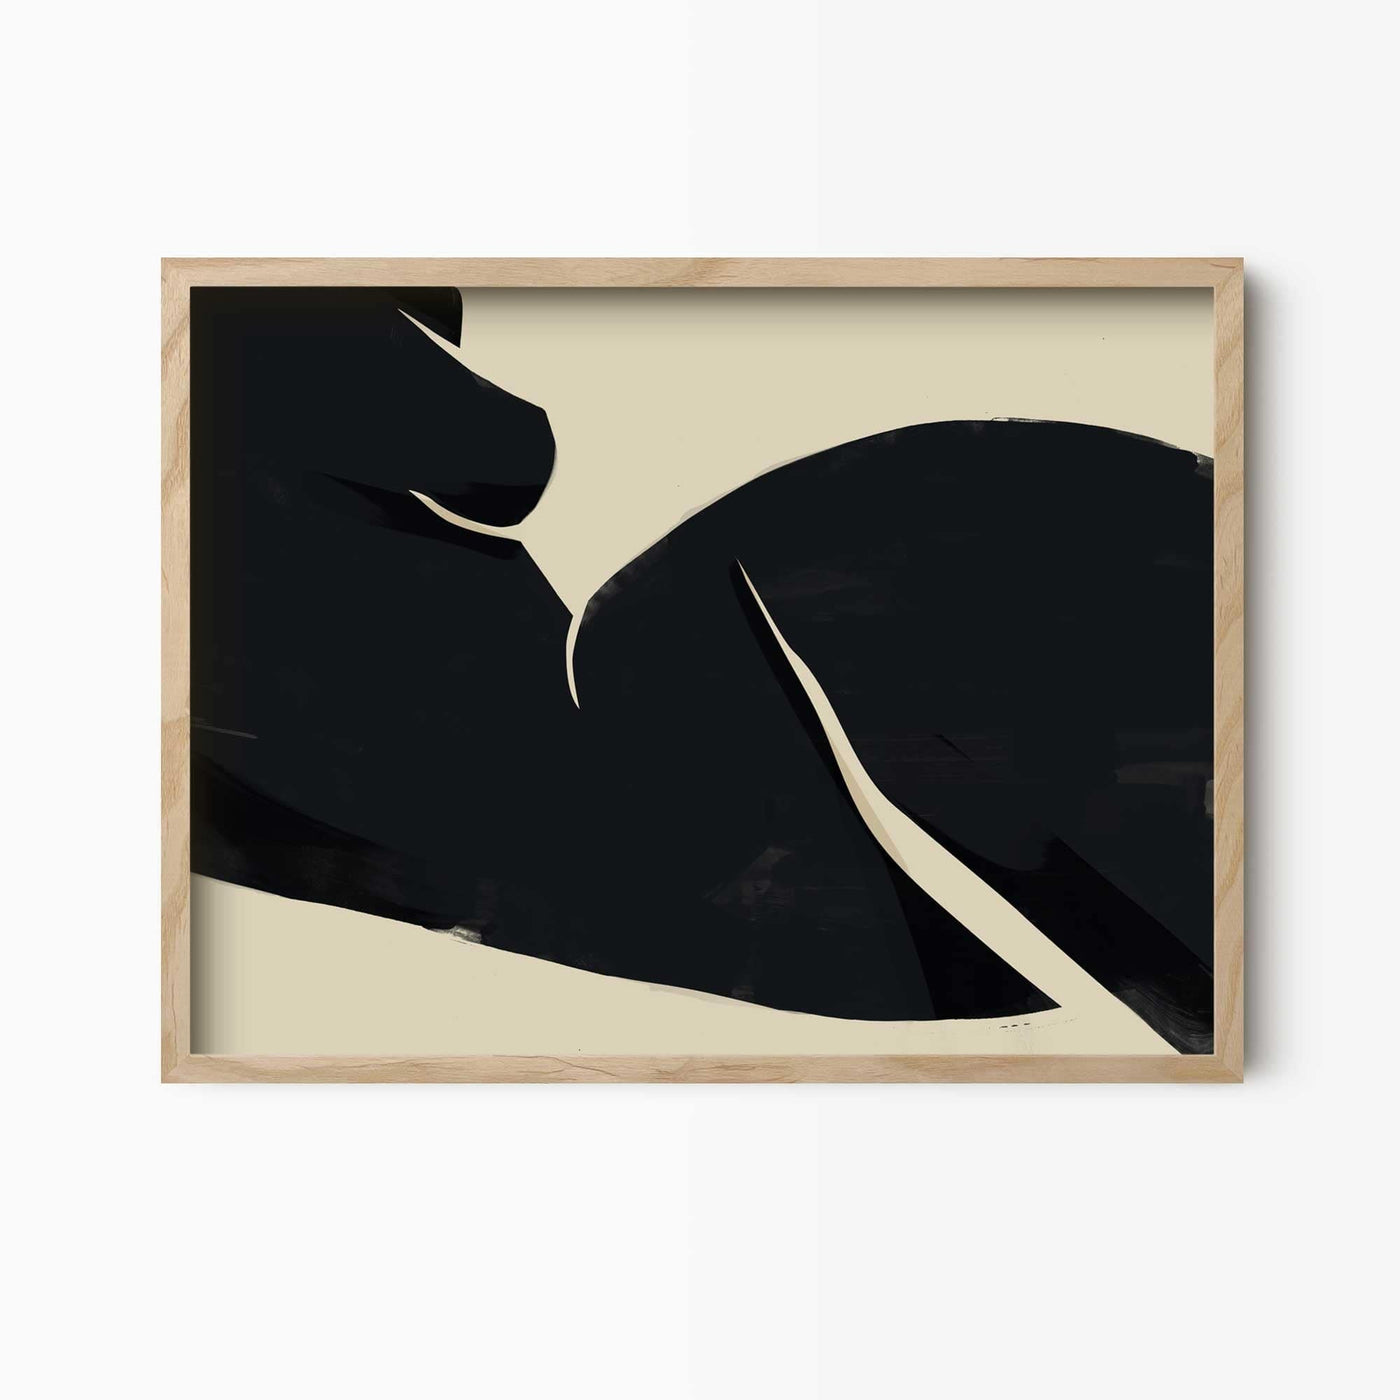 Green Lili 40x30cm (16x12") / Natural Frame Abstract Nude Print